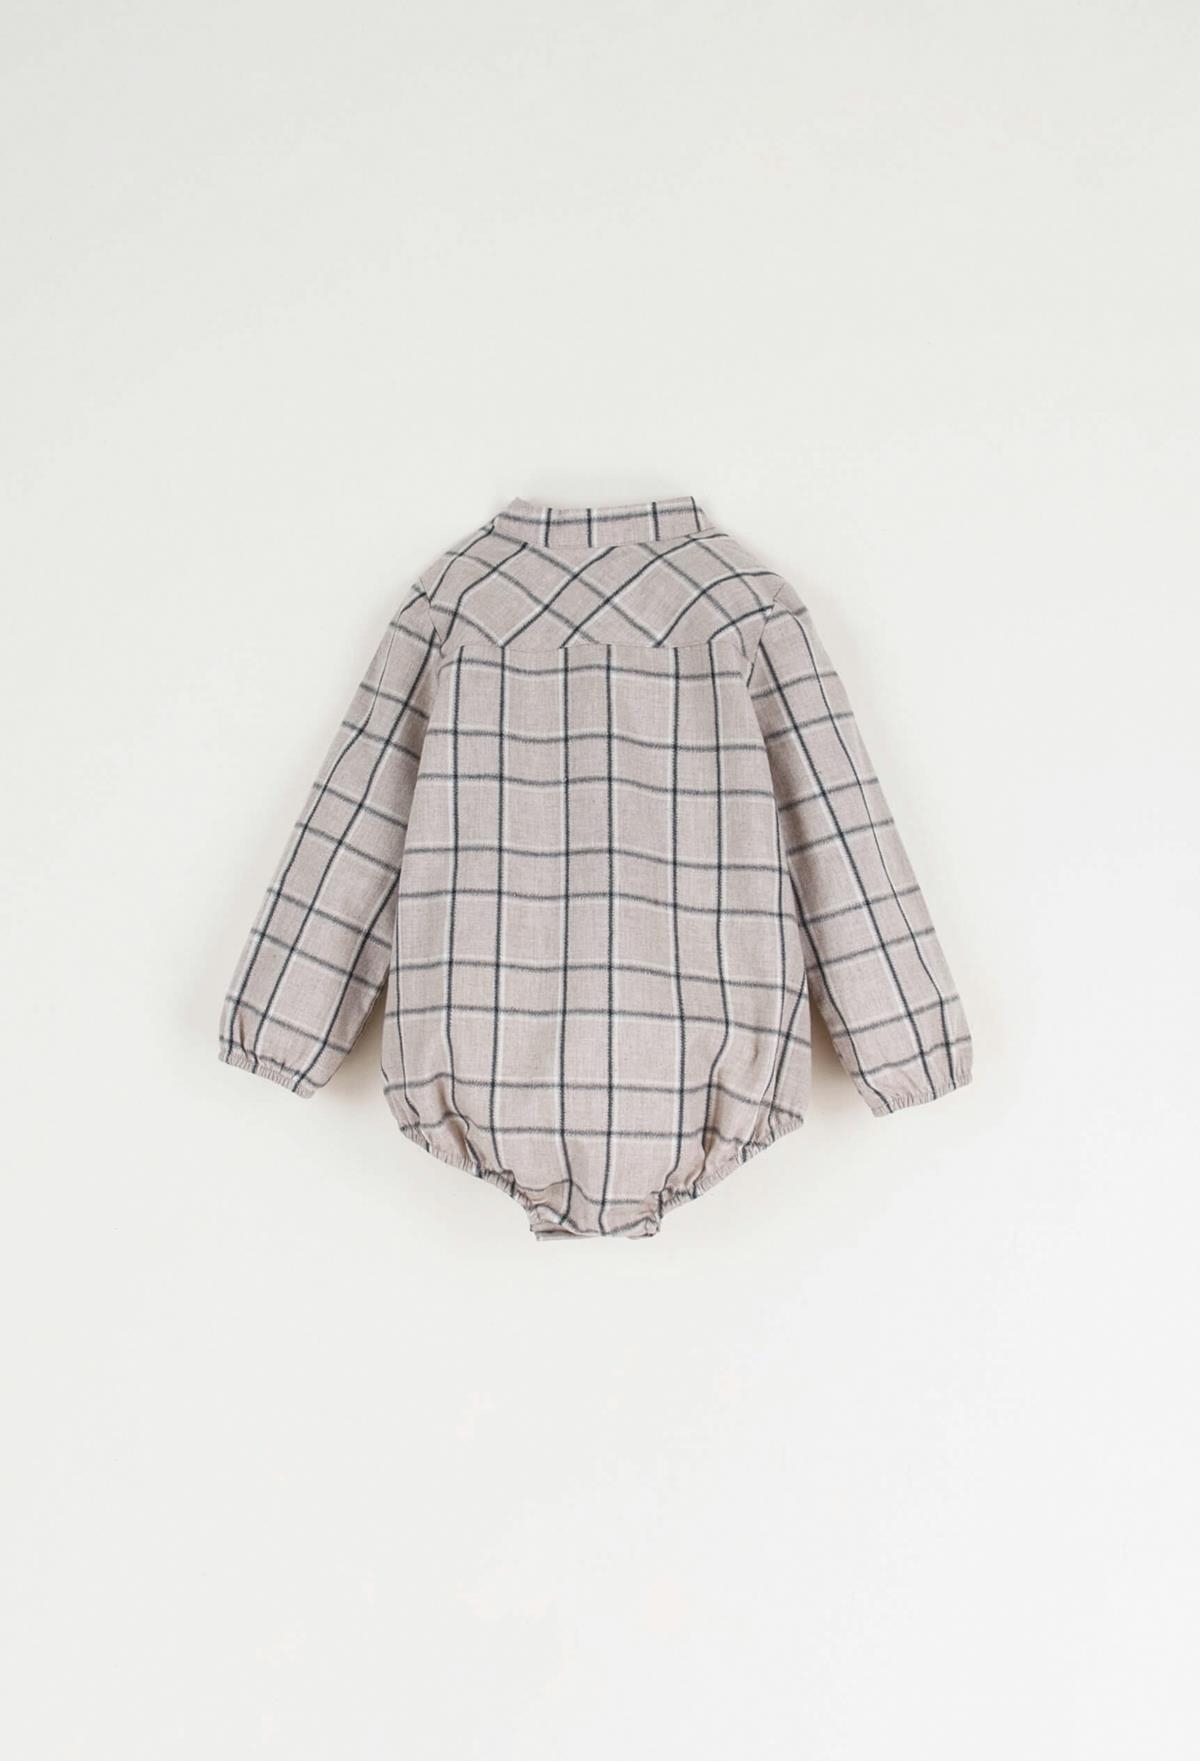 Mod.5.1 Taupe plaid organic fabric shirt-style romper suit | AW22.23 Mod.5.1 Taupe plaid organic fabric shirt-style romper suit